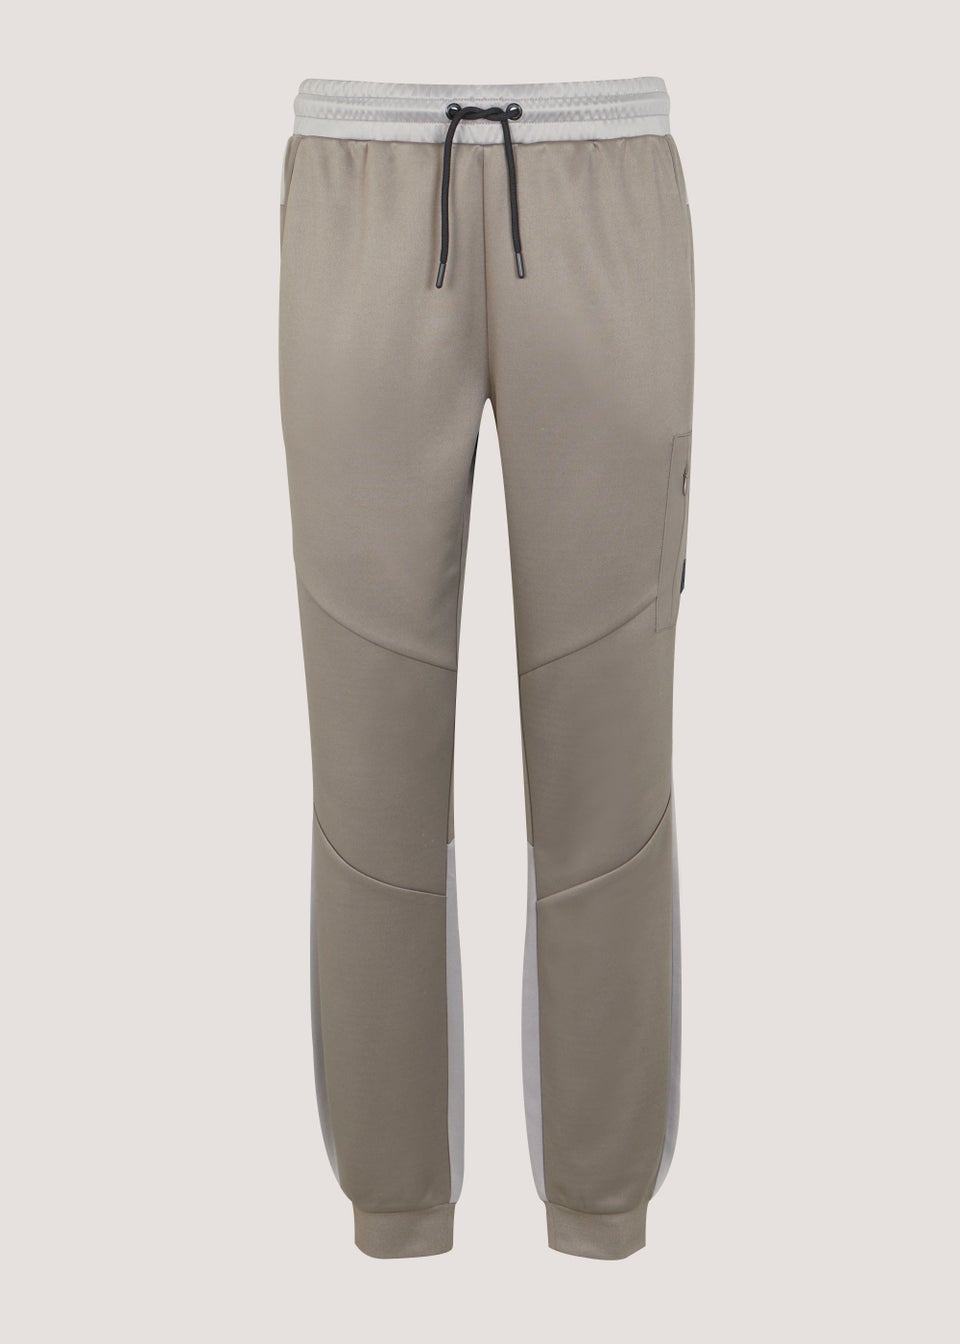 US Athletic Taupe Joggers